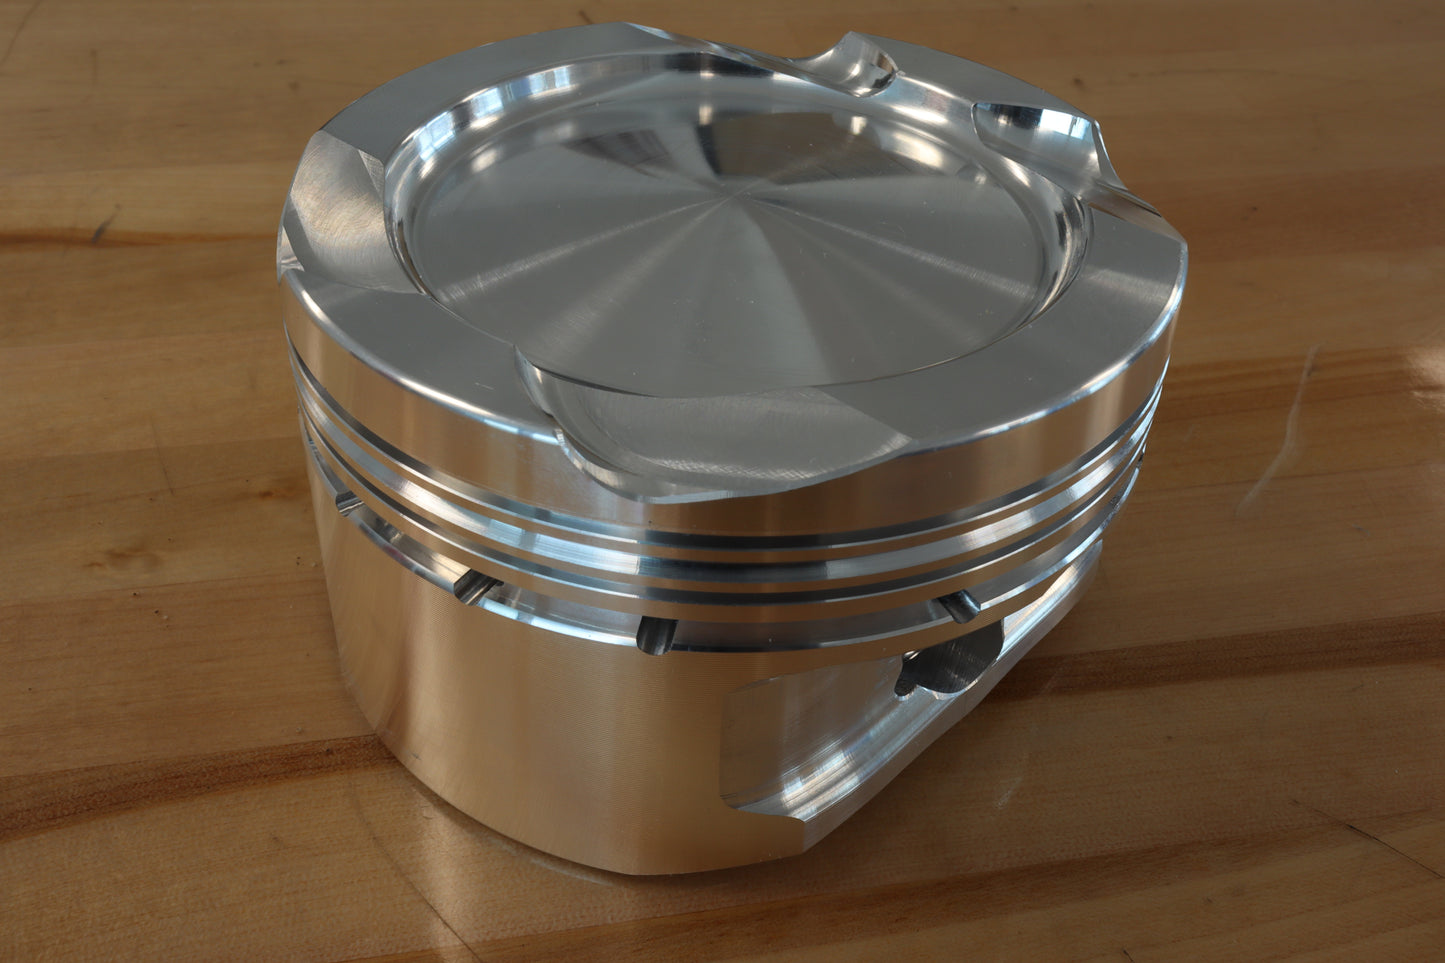 BMW N74 CP Forged Piston Set - Sleeved Block